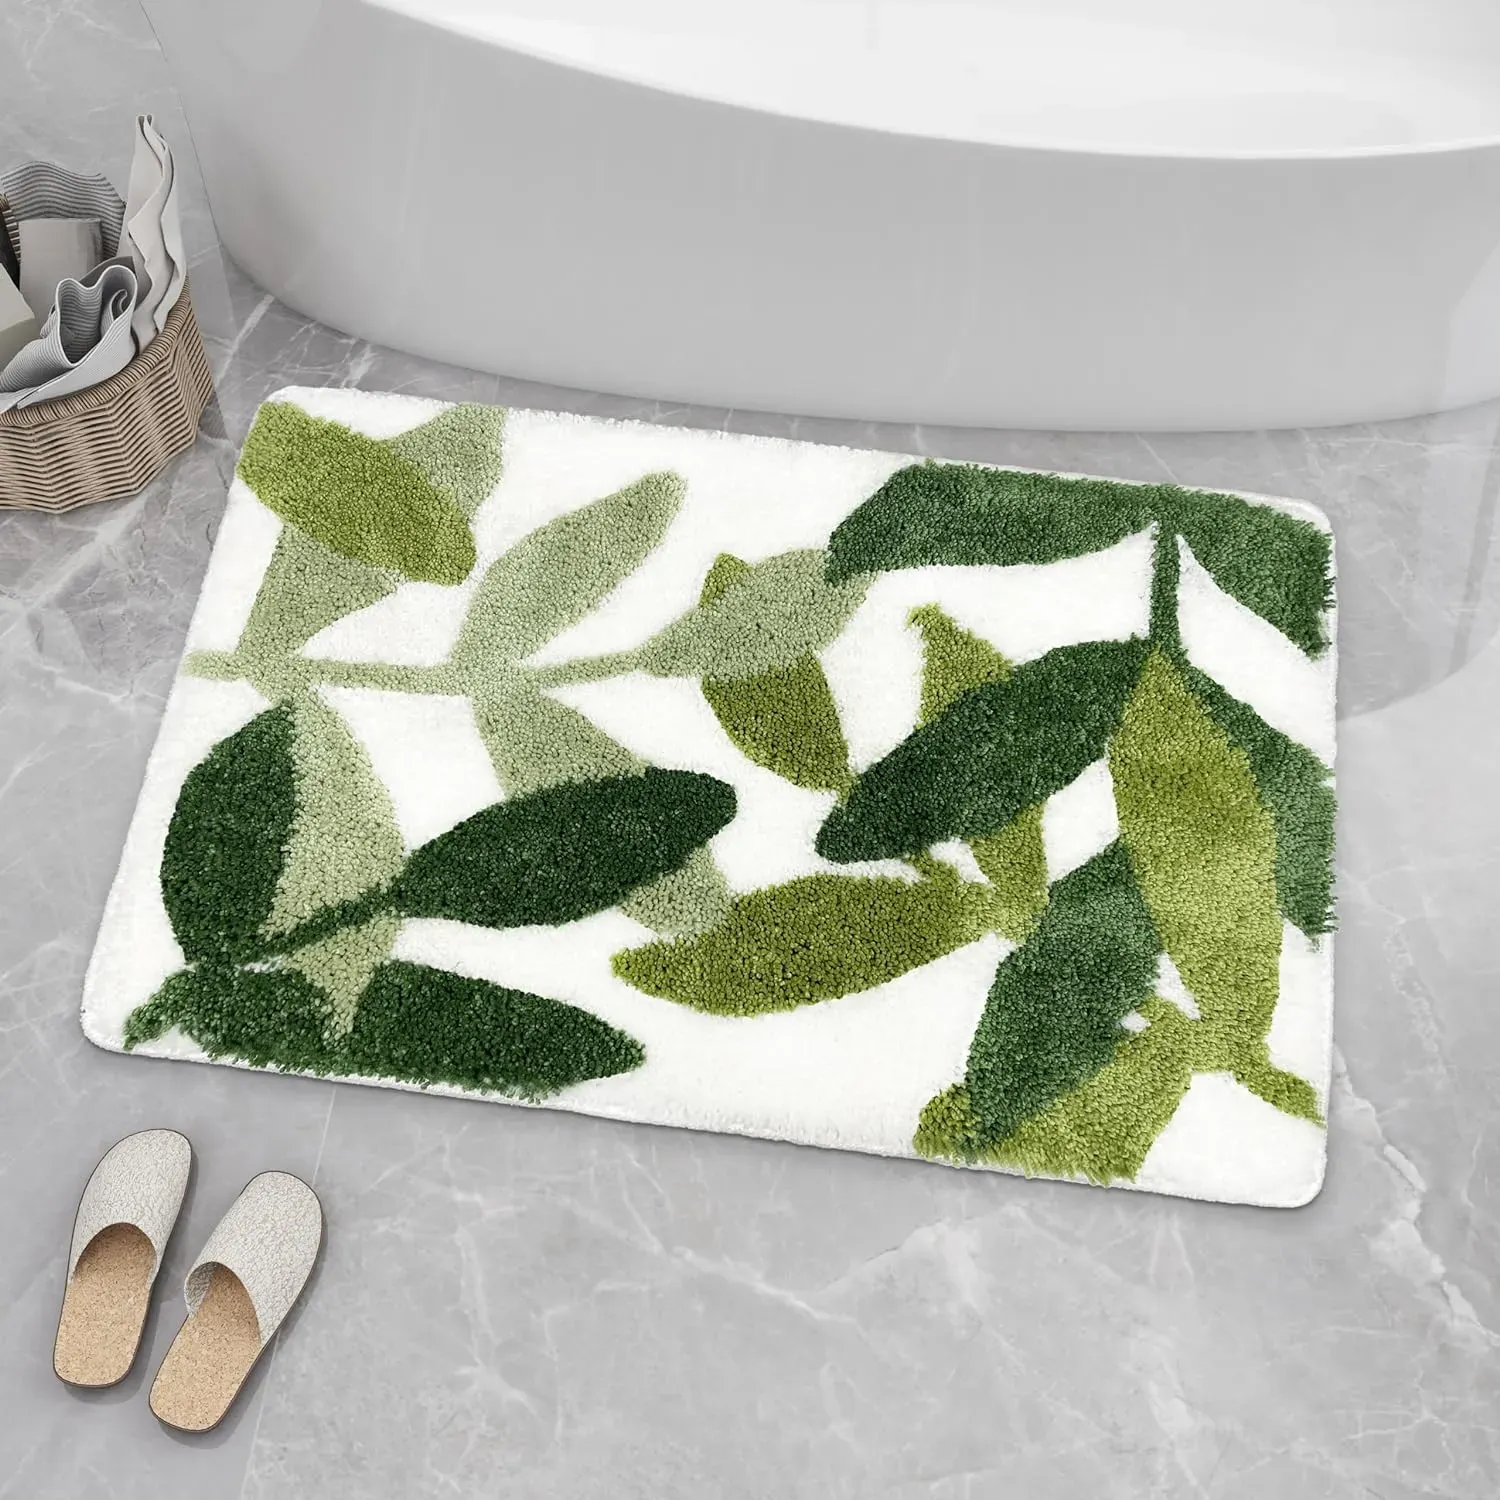 Mats Bathroom Rugs 31.5 X 19.5IN Bath Mat Green Leaves Microfiber Strong Water Absorbent Non Slip Back Cute Rug for Bathroom